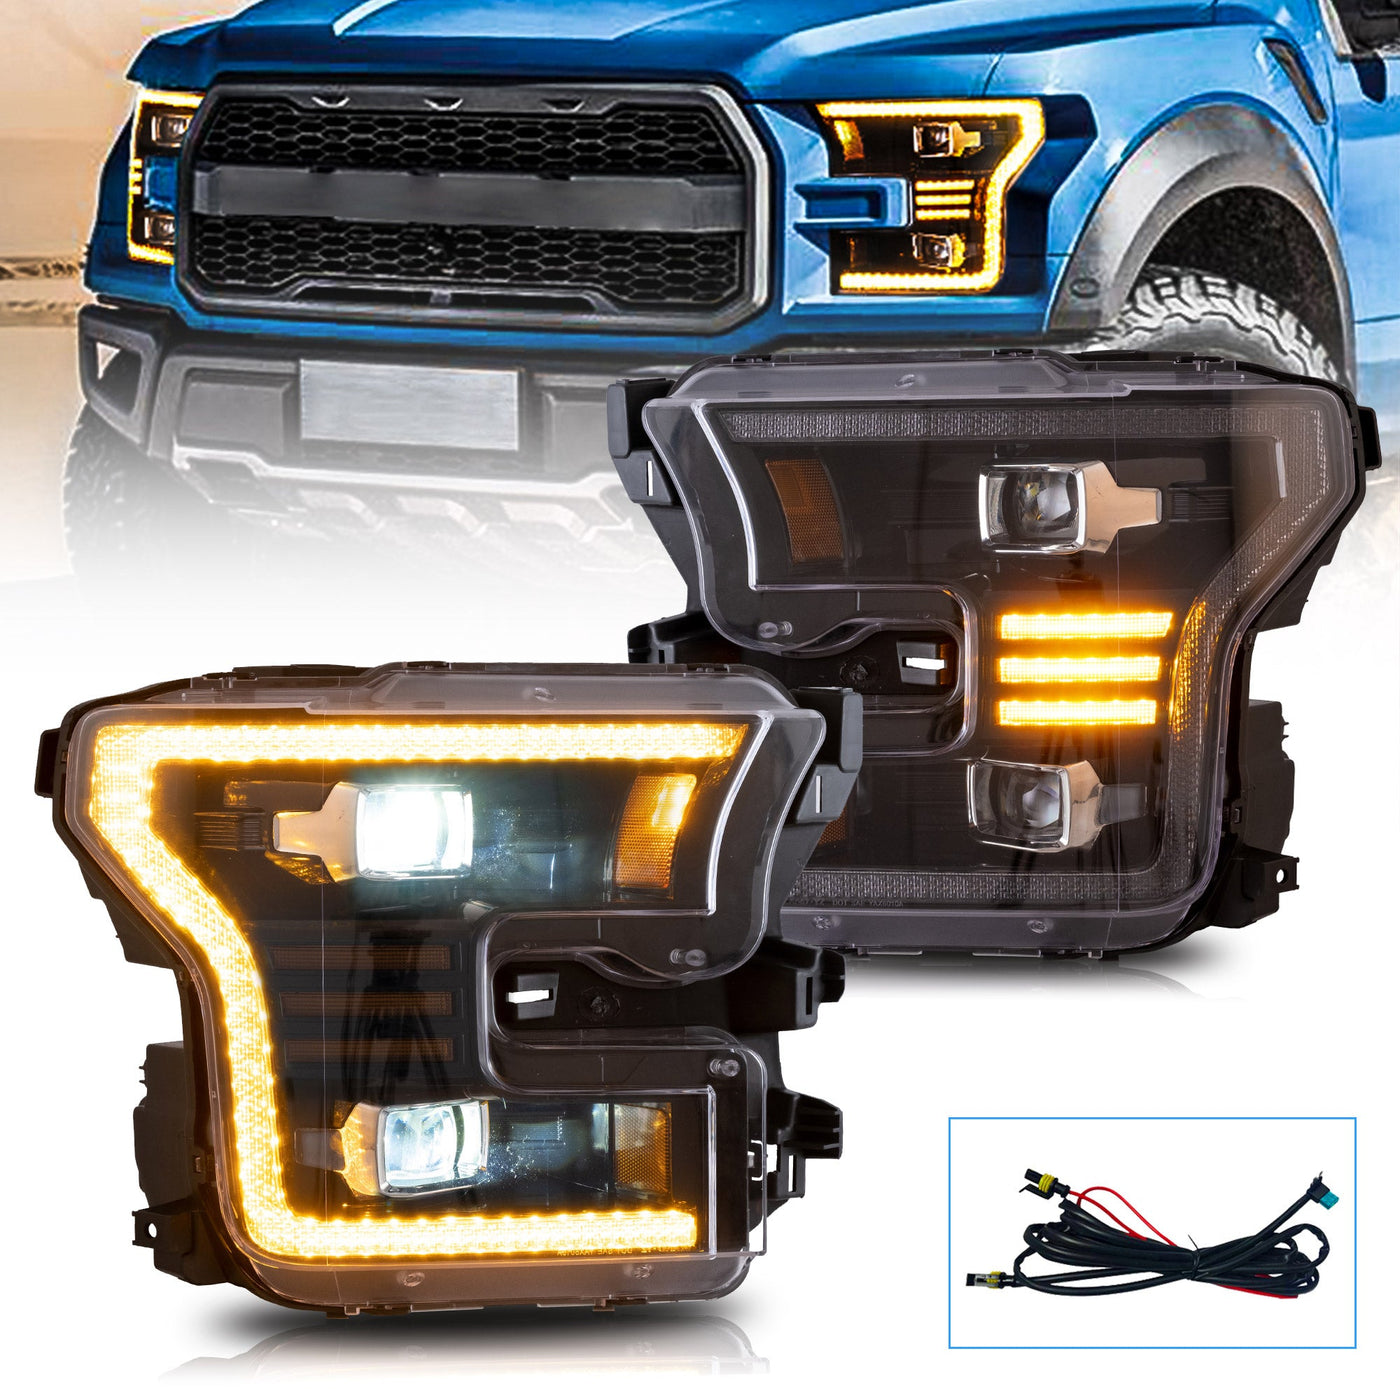 VLAND Full LED Headlights For Ford F150 13th Gen Pickup 2015-2017 With Amber DRL